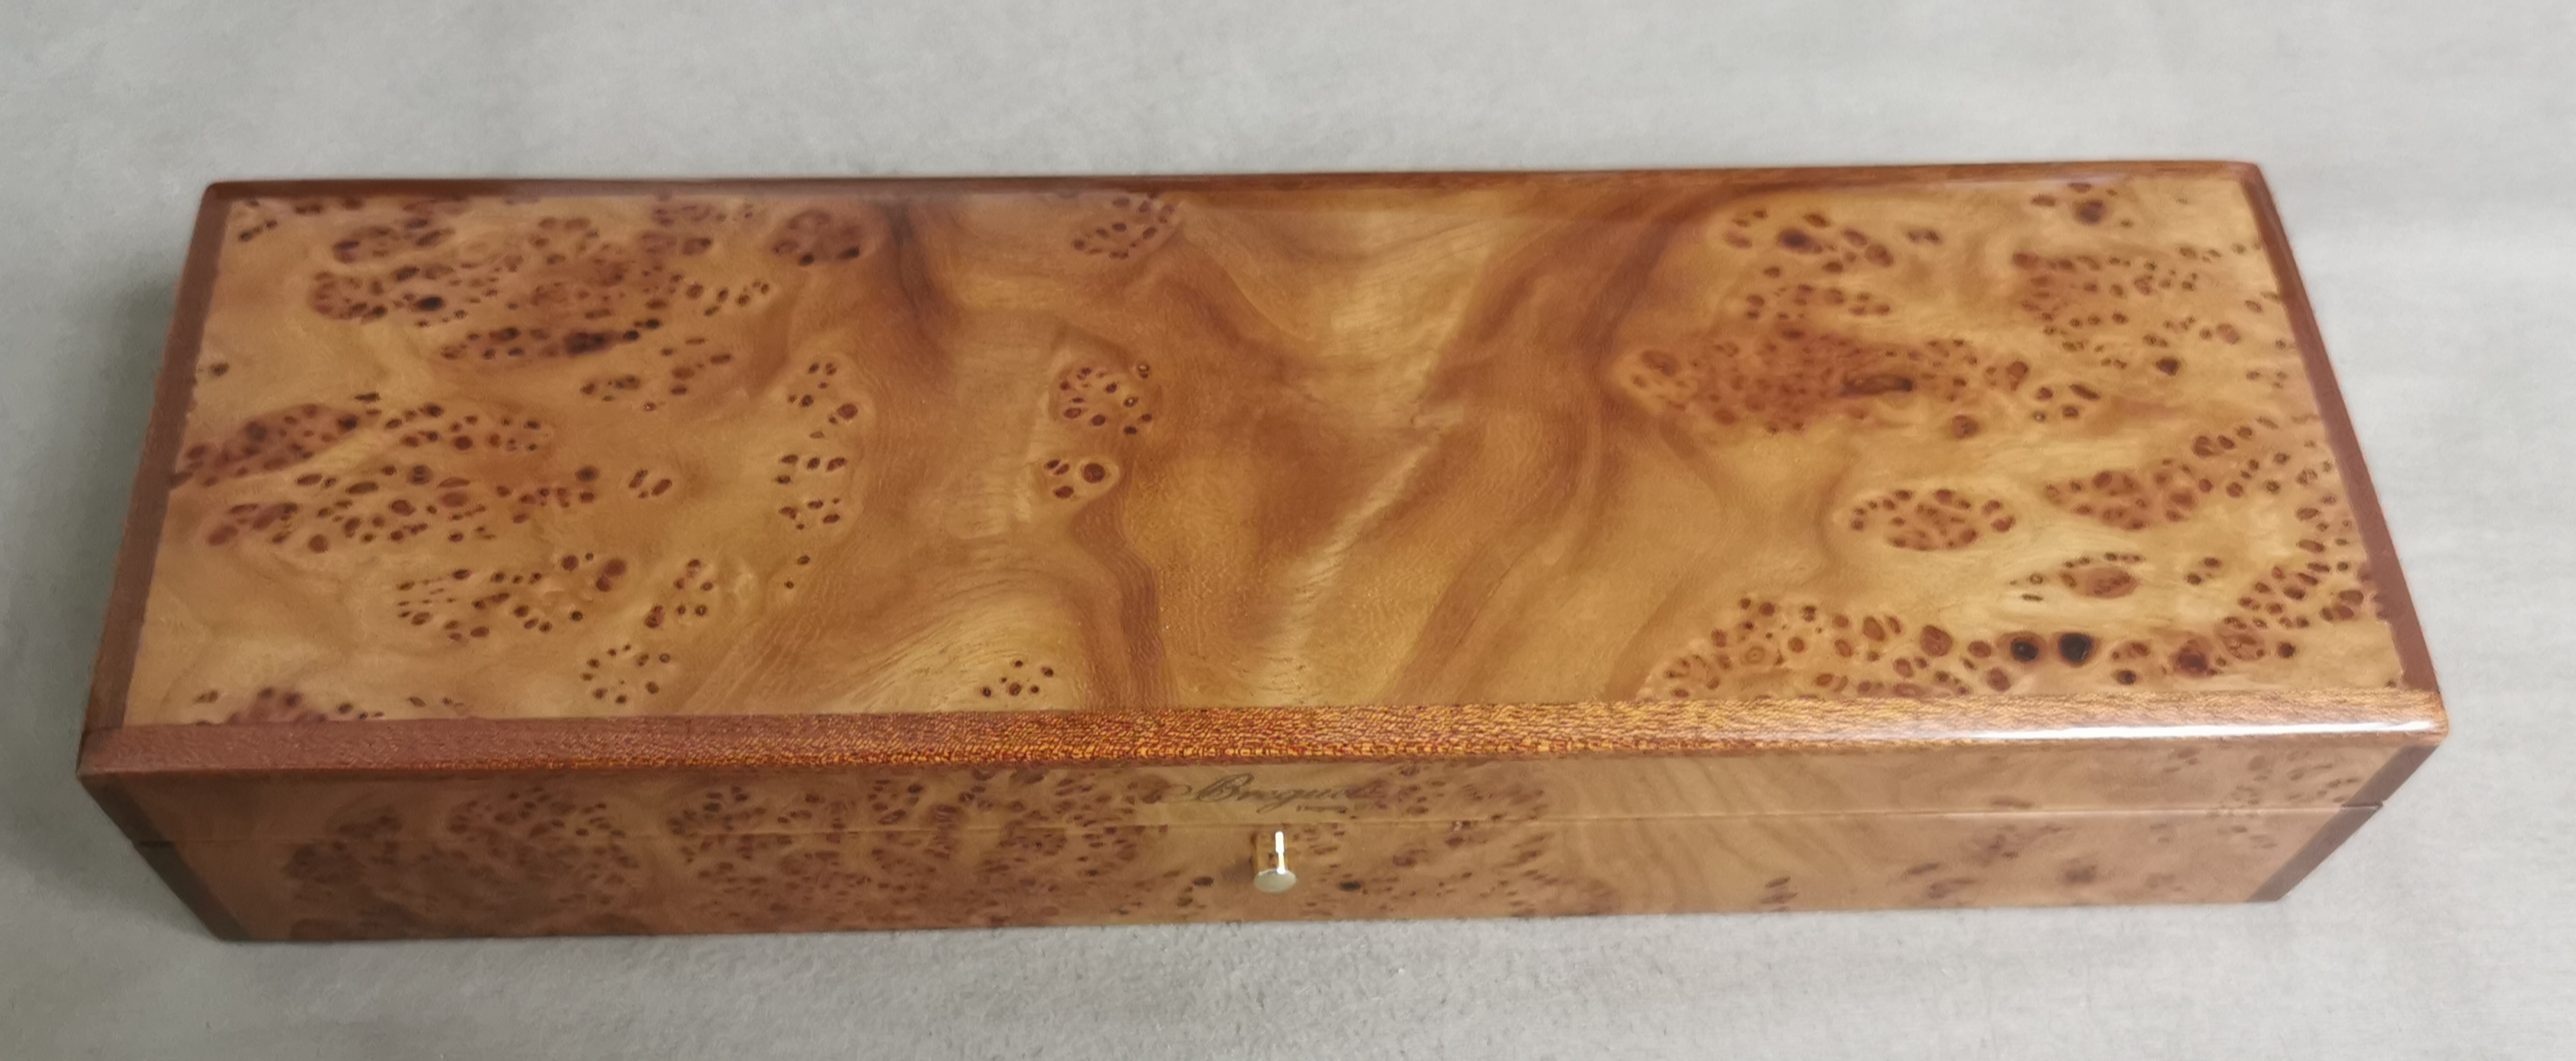 Breguet vintage briar wood watch box for any models like new condition | San Giorgio a Cremano